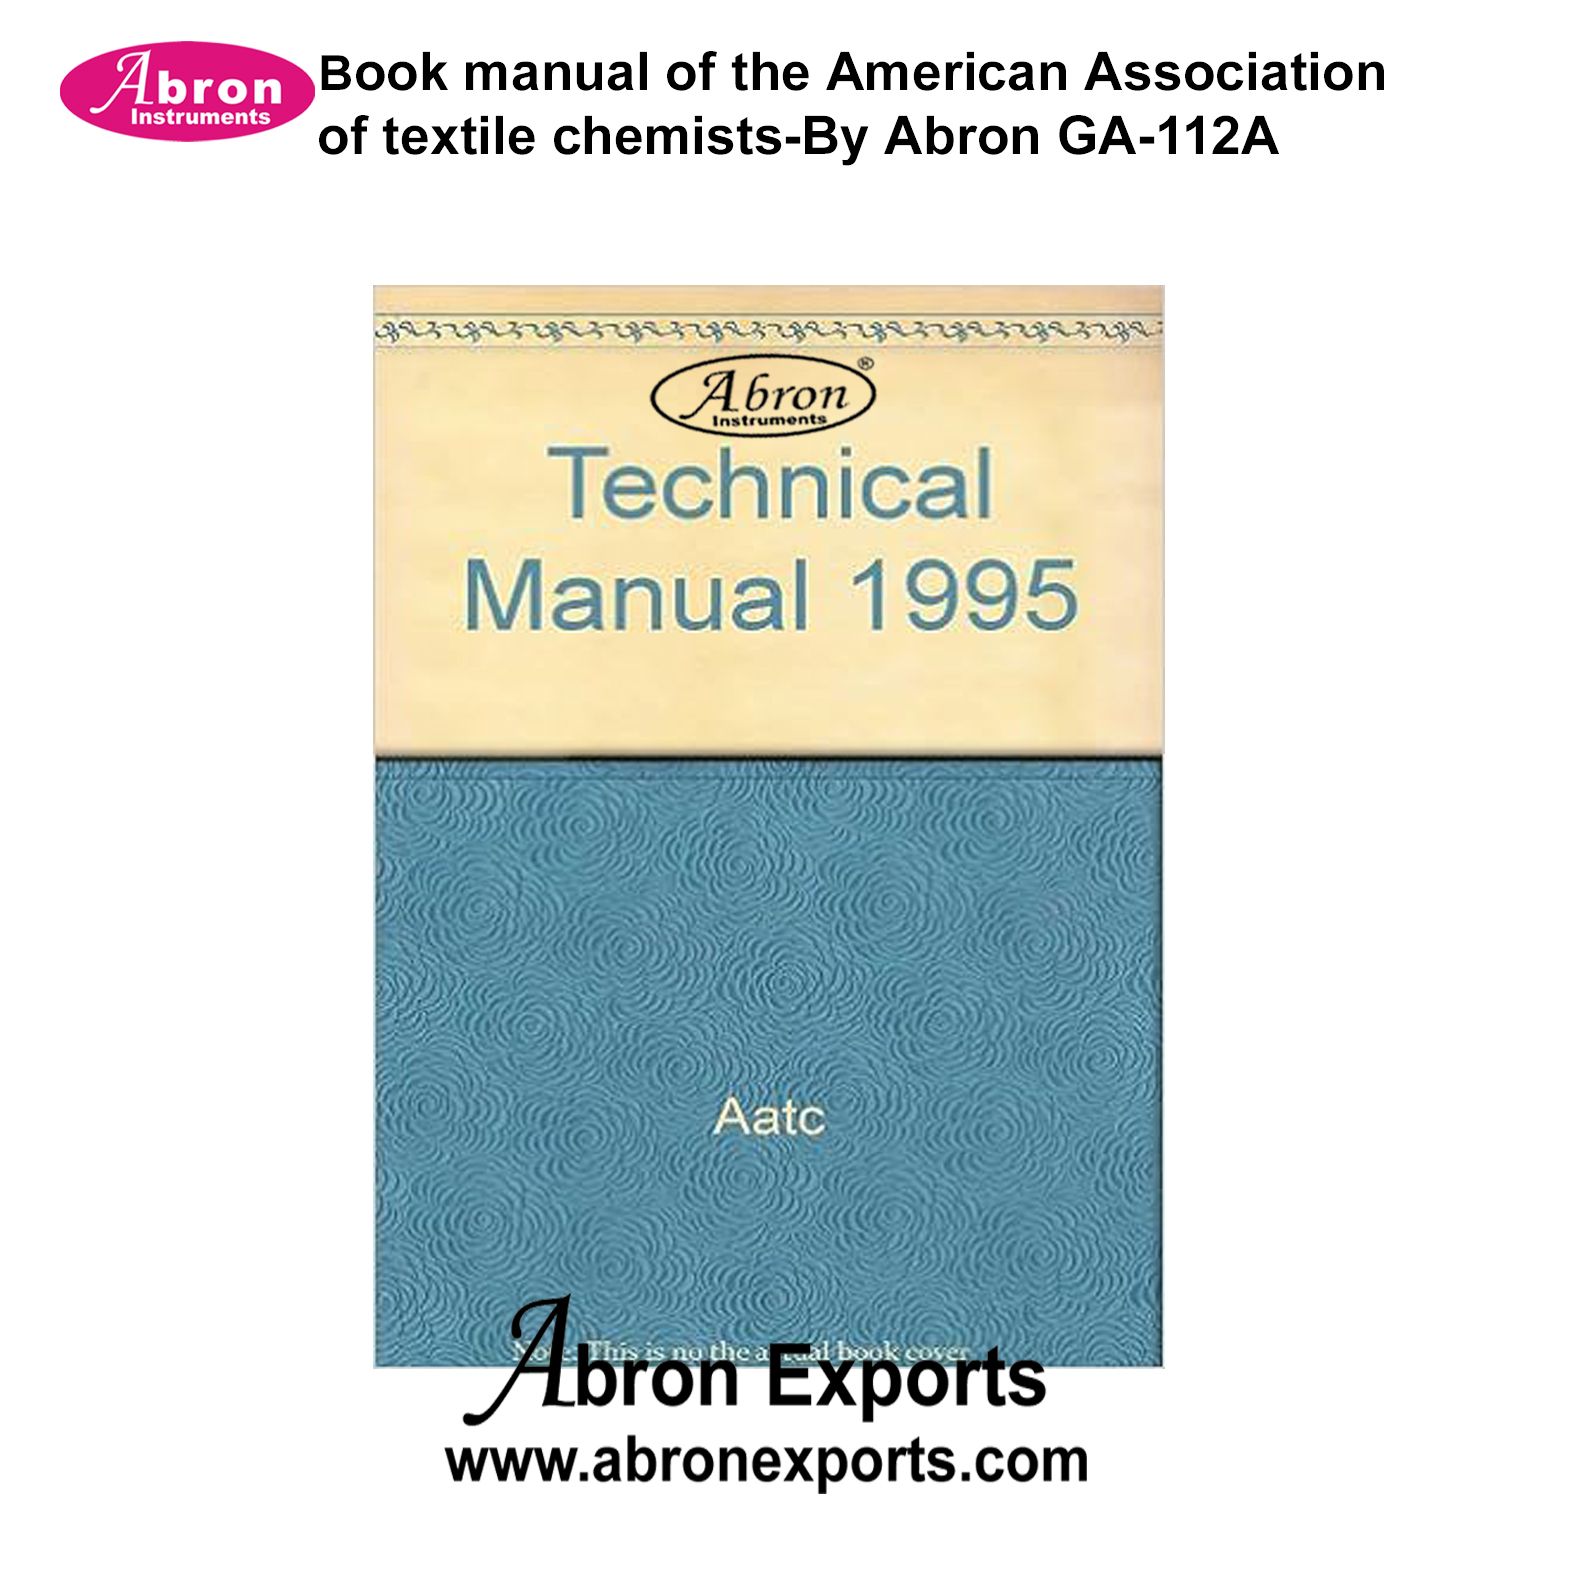 Book Manual of the American Association Of Textile Chemists By Abron